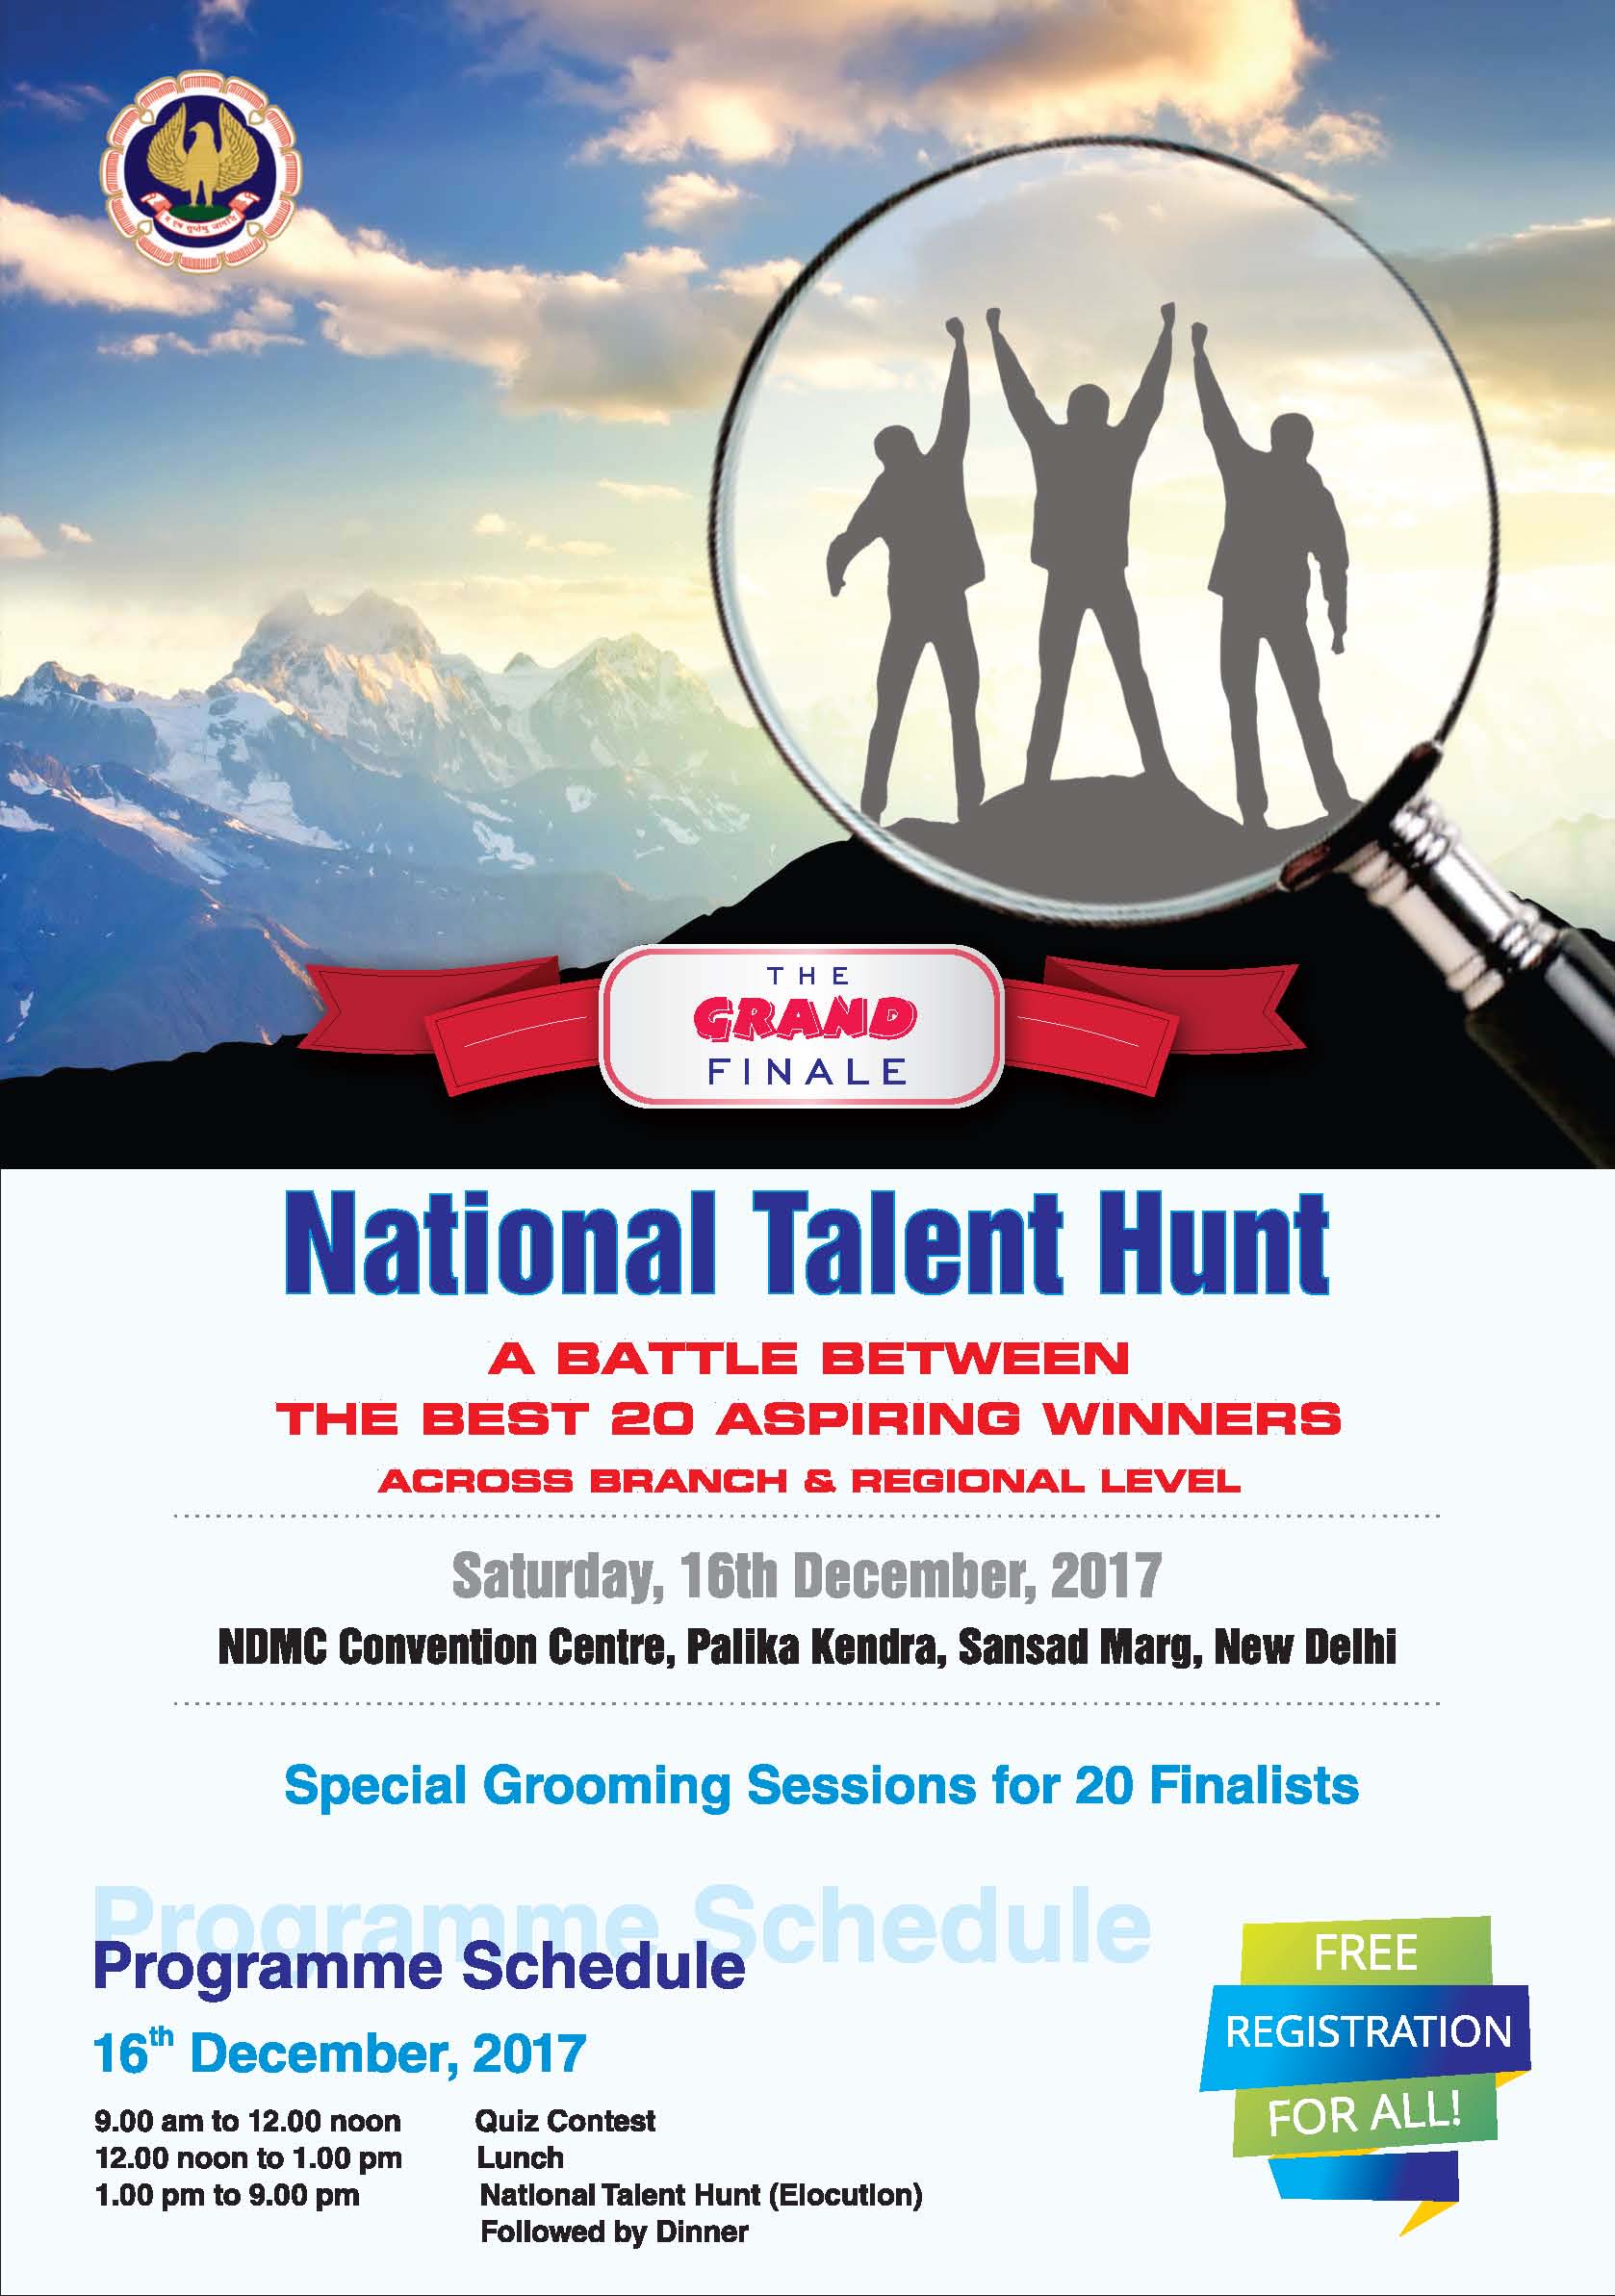 20 Budding Accountants qualify for Grand Finale of National Talent Hunt organized by ICAI